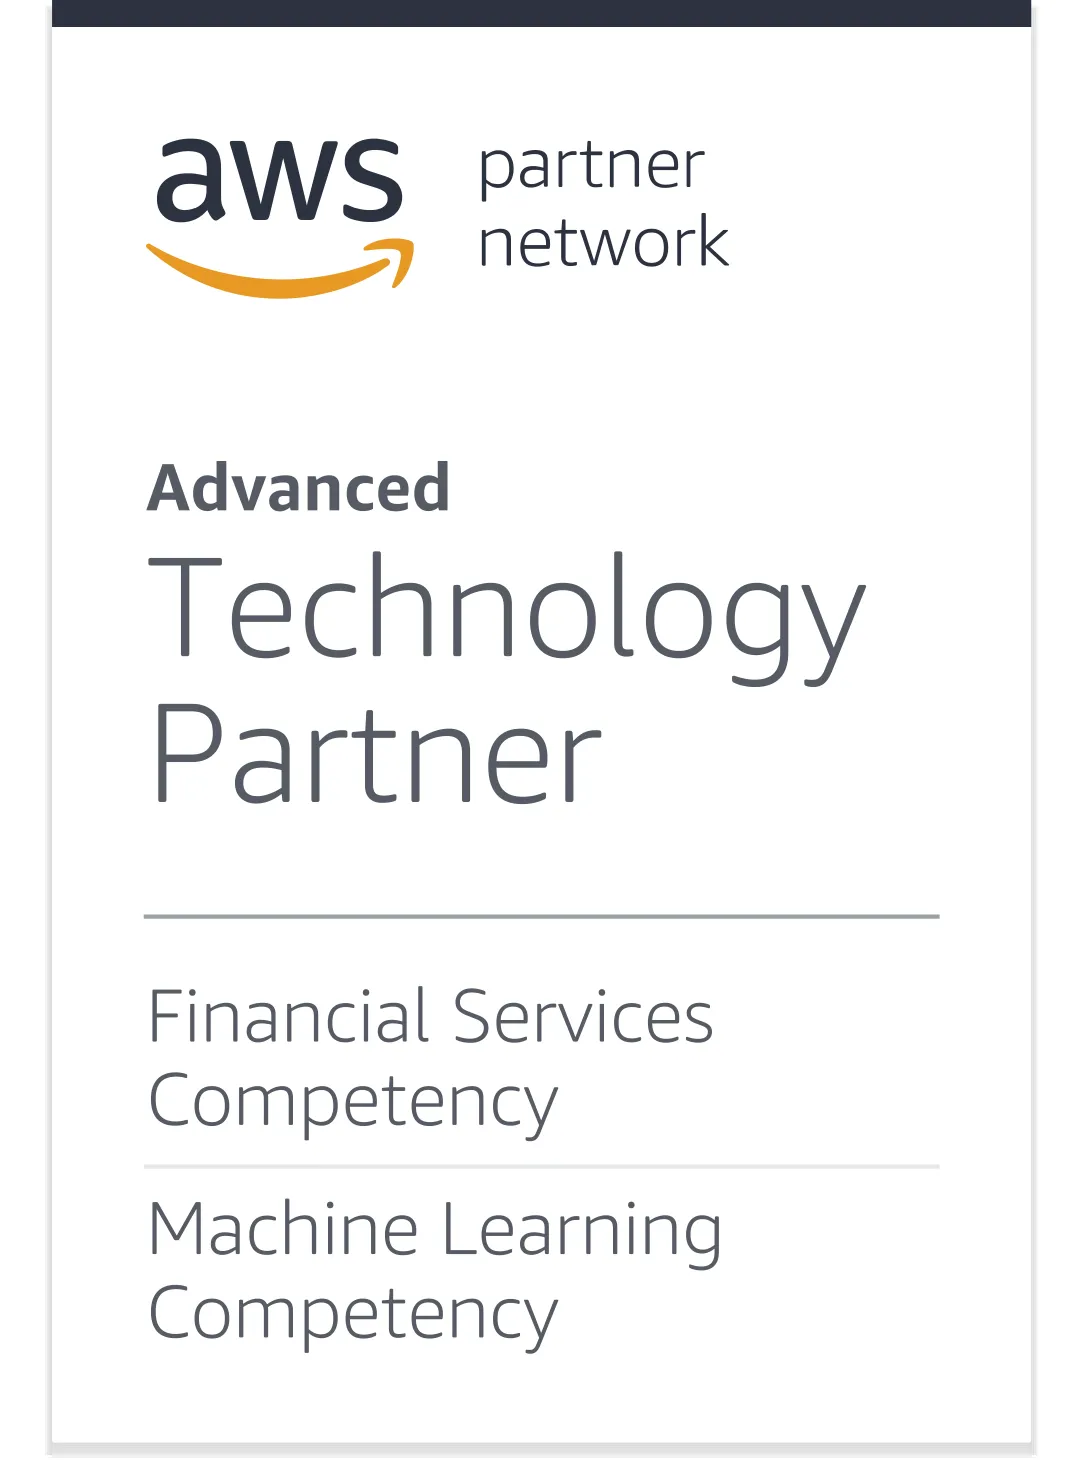 Advanced Technology Partner with Financial Services Competency and Machine Learning Competency